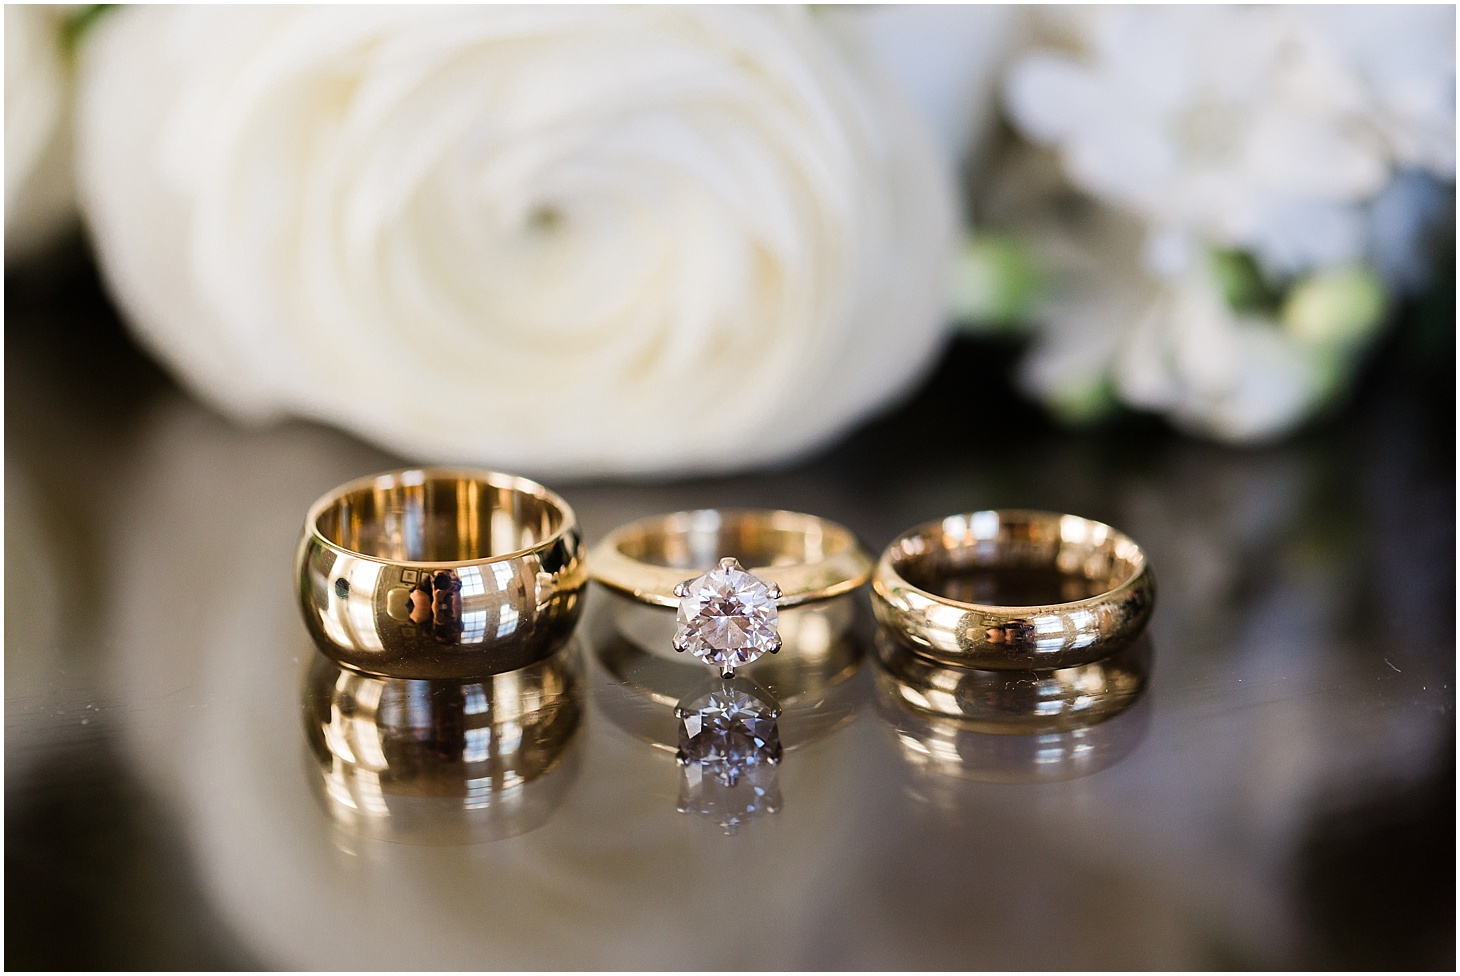 Gold Engagement Ring and Wedding Bands, Champagne-toned Multicultural Wedding the Hay-Adams Hotel, Ceremony at National City Christian Church, Sarah Bradshaw Photography, DC Wedding Photographer